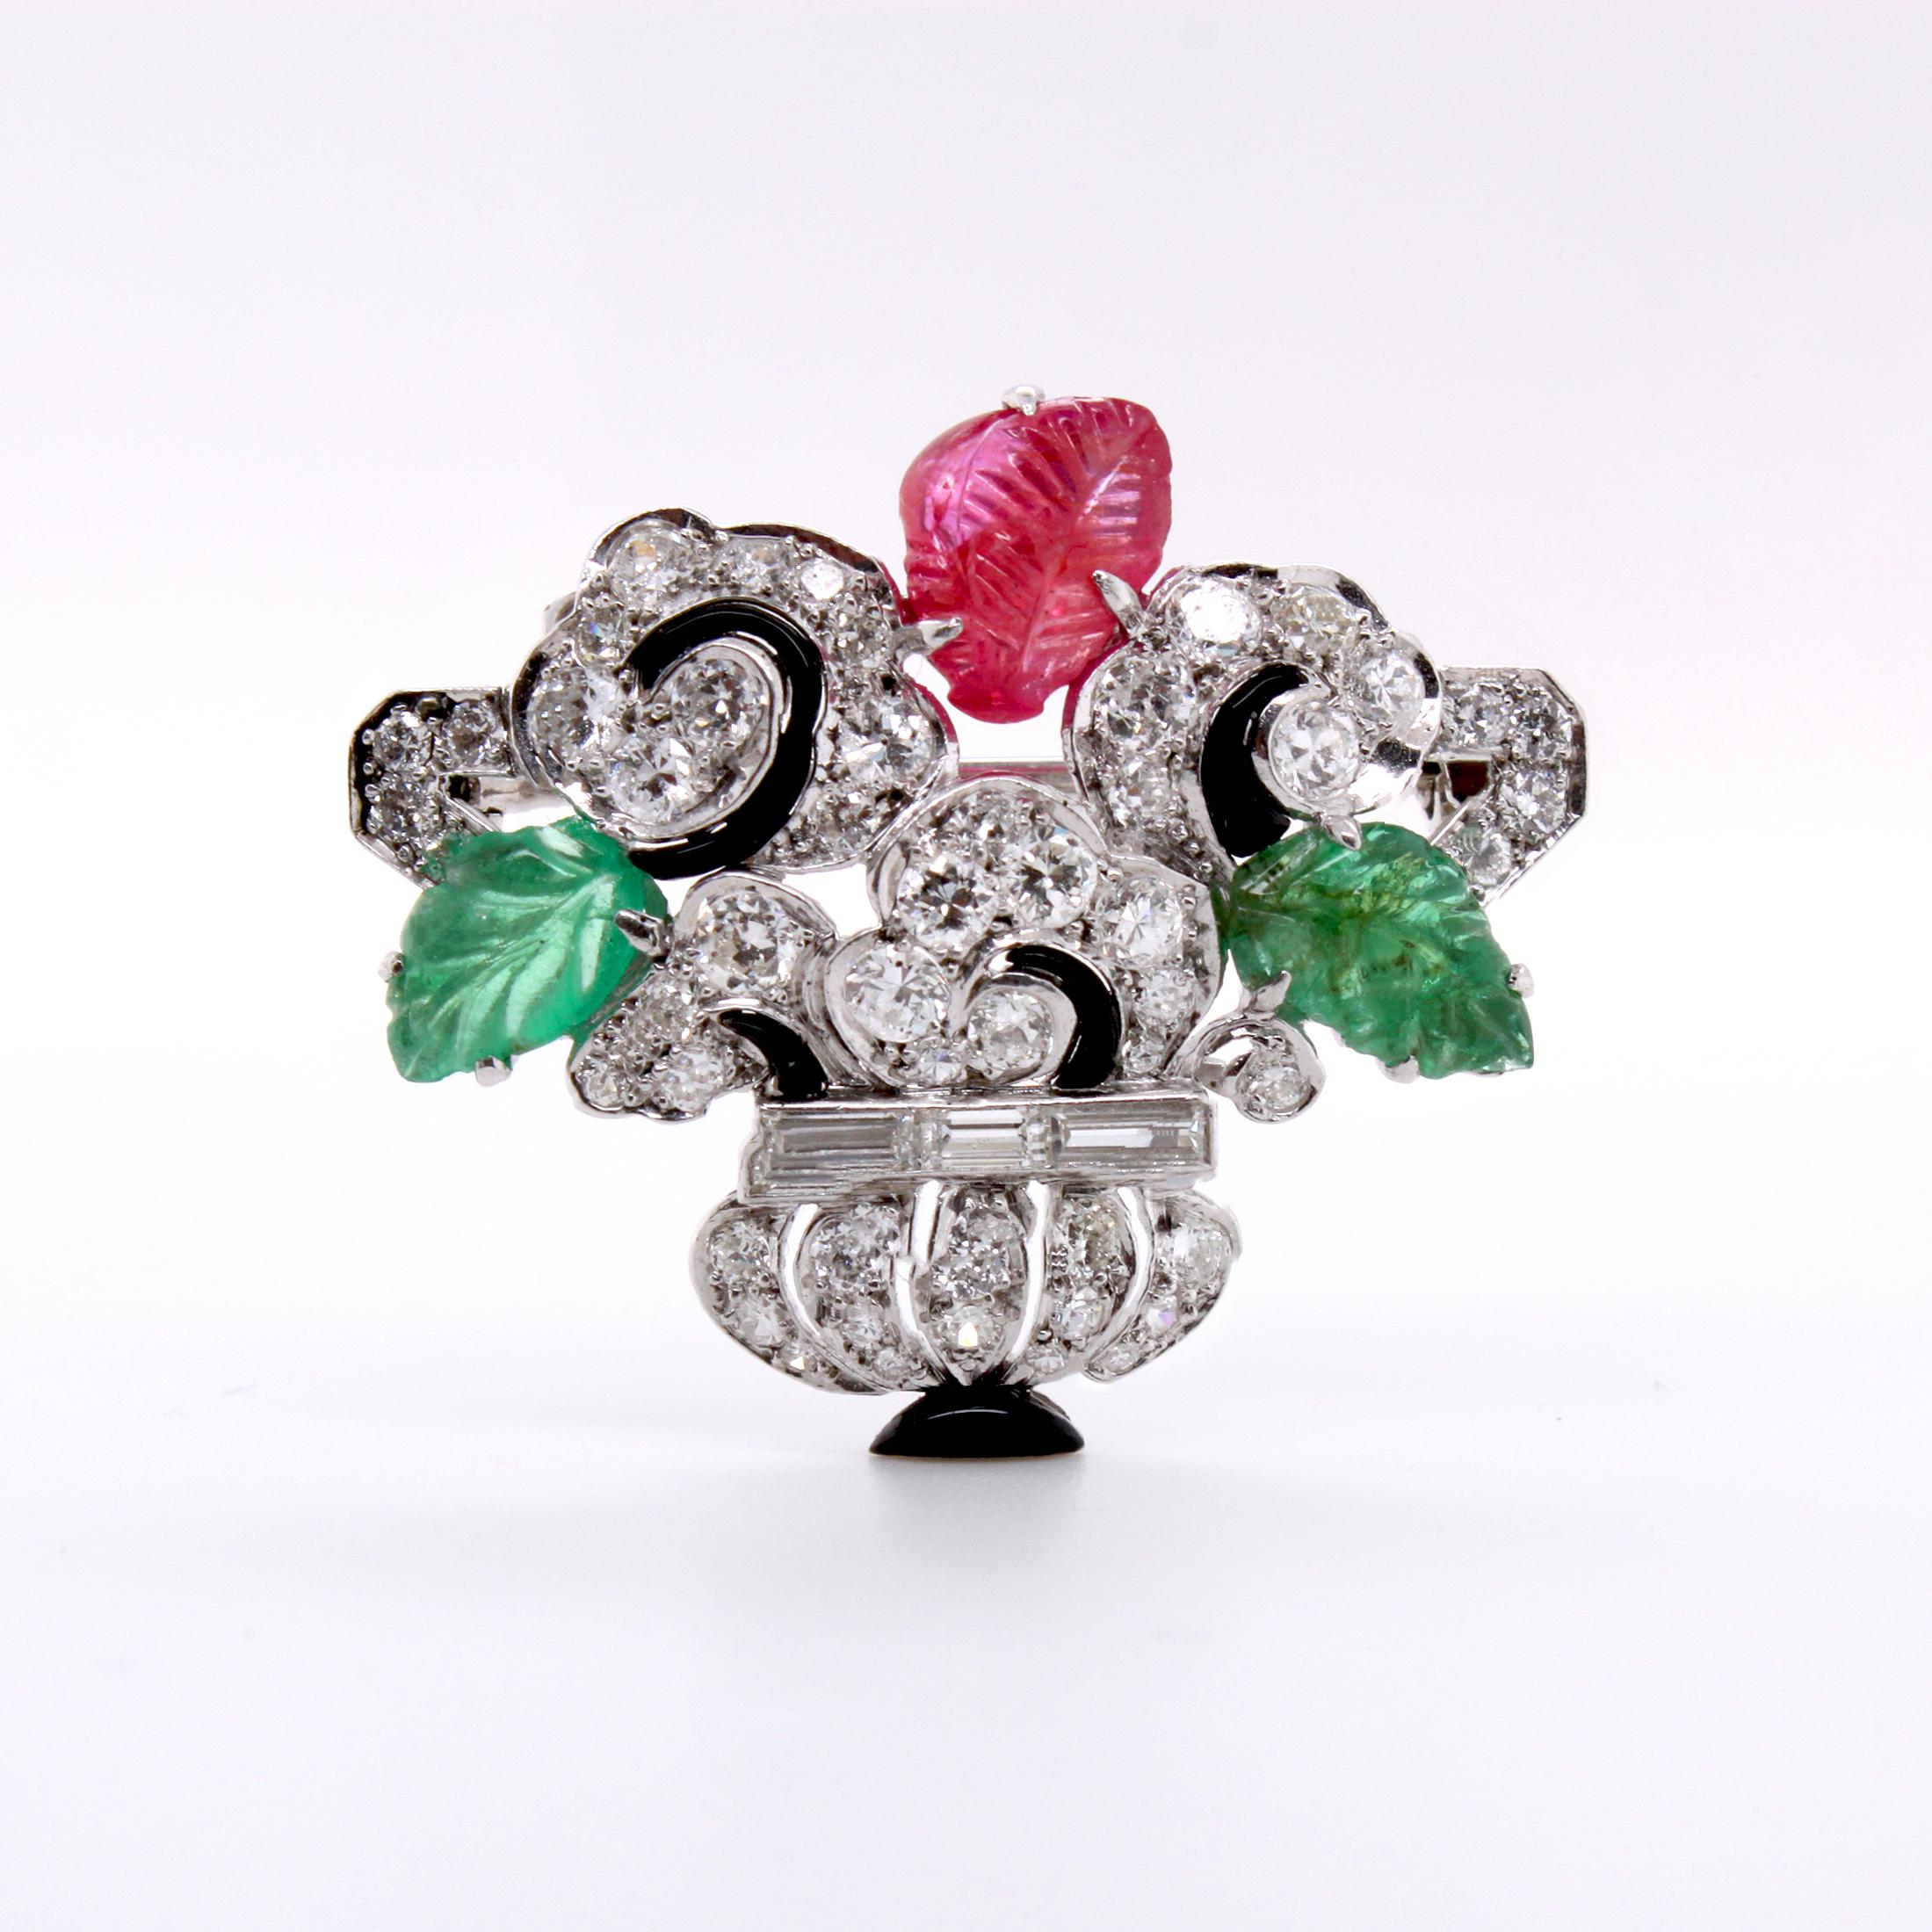 Cartier Art Deco Tutti Frutti Flower Vase Brooch, ca. 1930s

A beautiful and rare Cartier Tutti Frutti brooch depicting a flower vase with carved ruby and carved emerald leaves. The rest of the brooch has round brilliant cut and step cut diamonds,